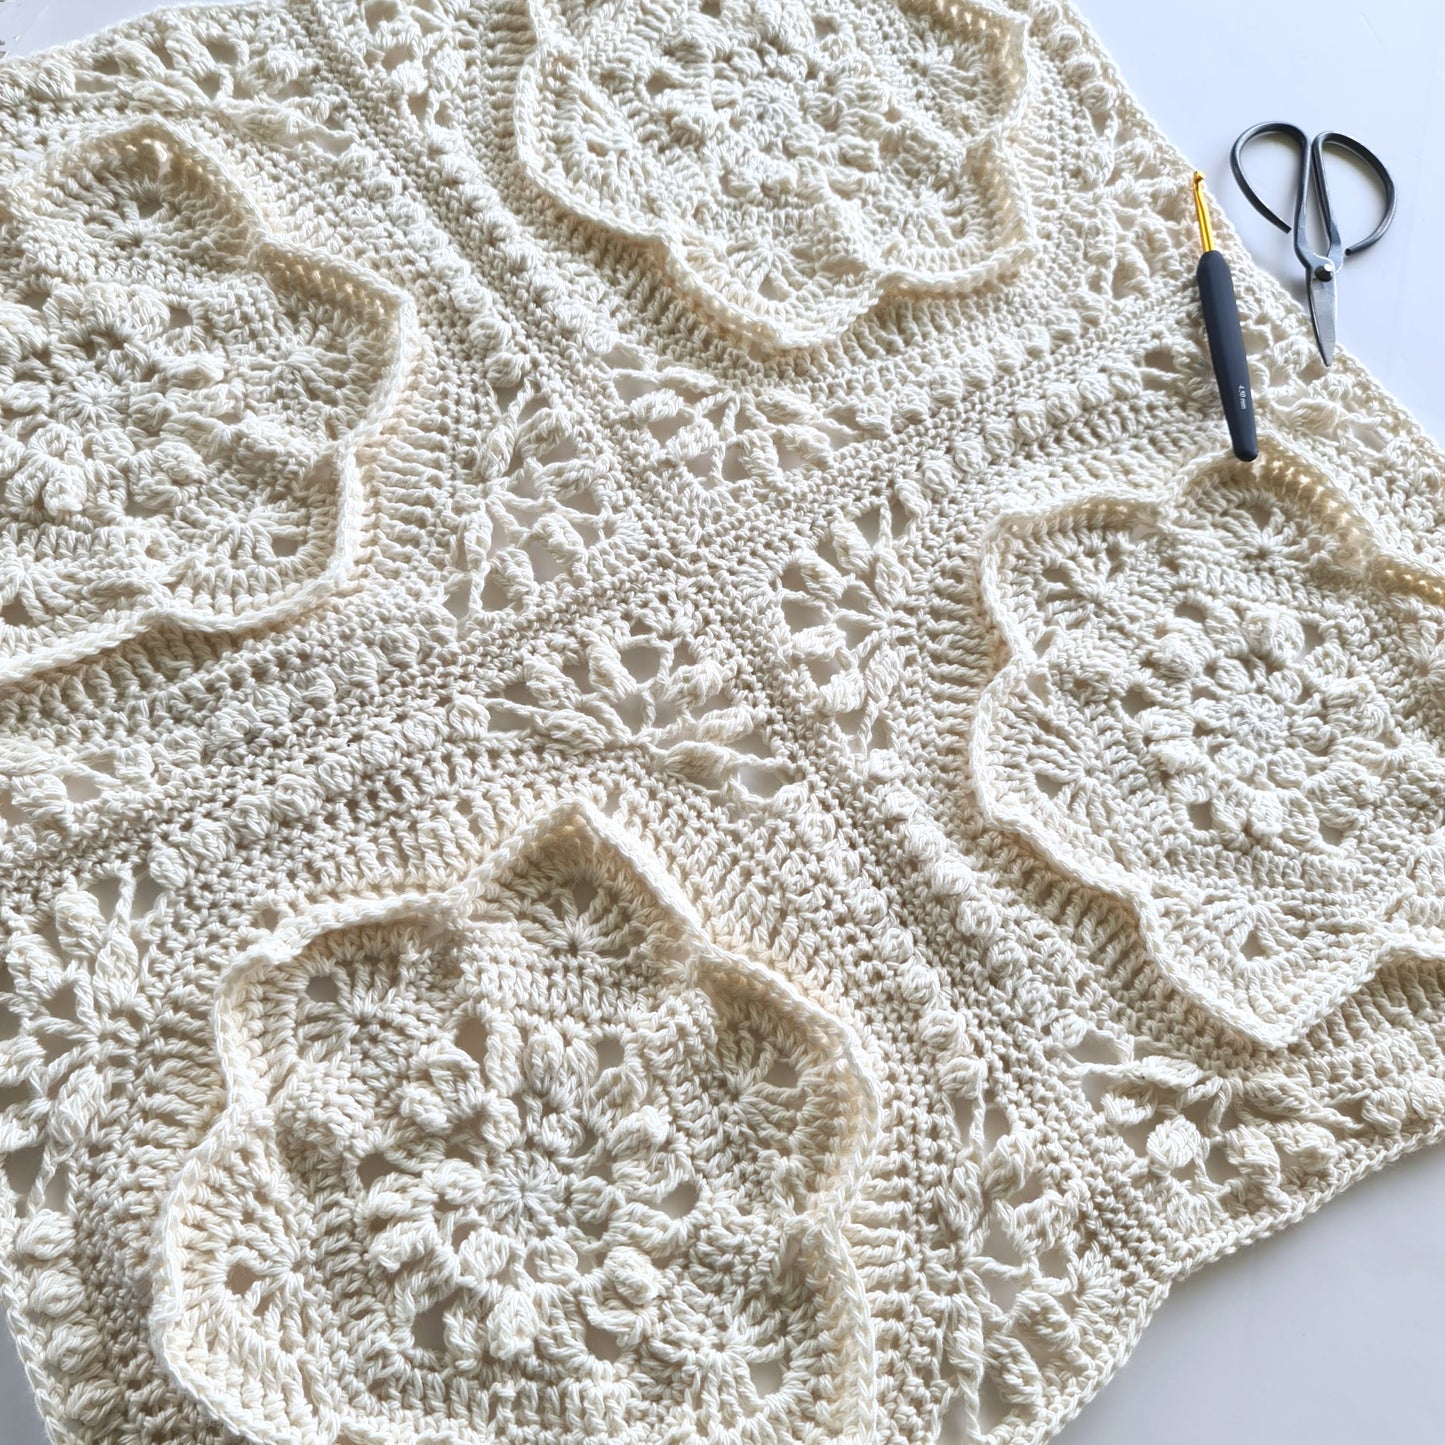 4 cream floral granny squares joined with scissors and crochet hook Asterales Crochet Granny Square Pattern by Shelley Husband